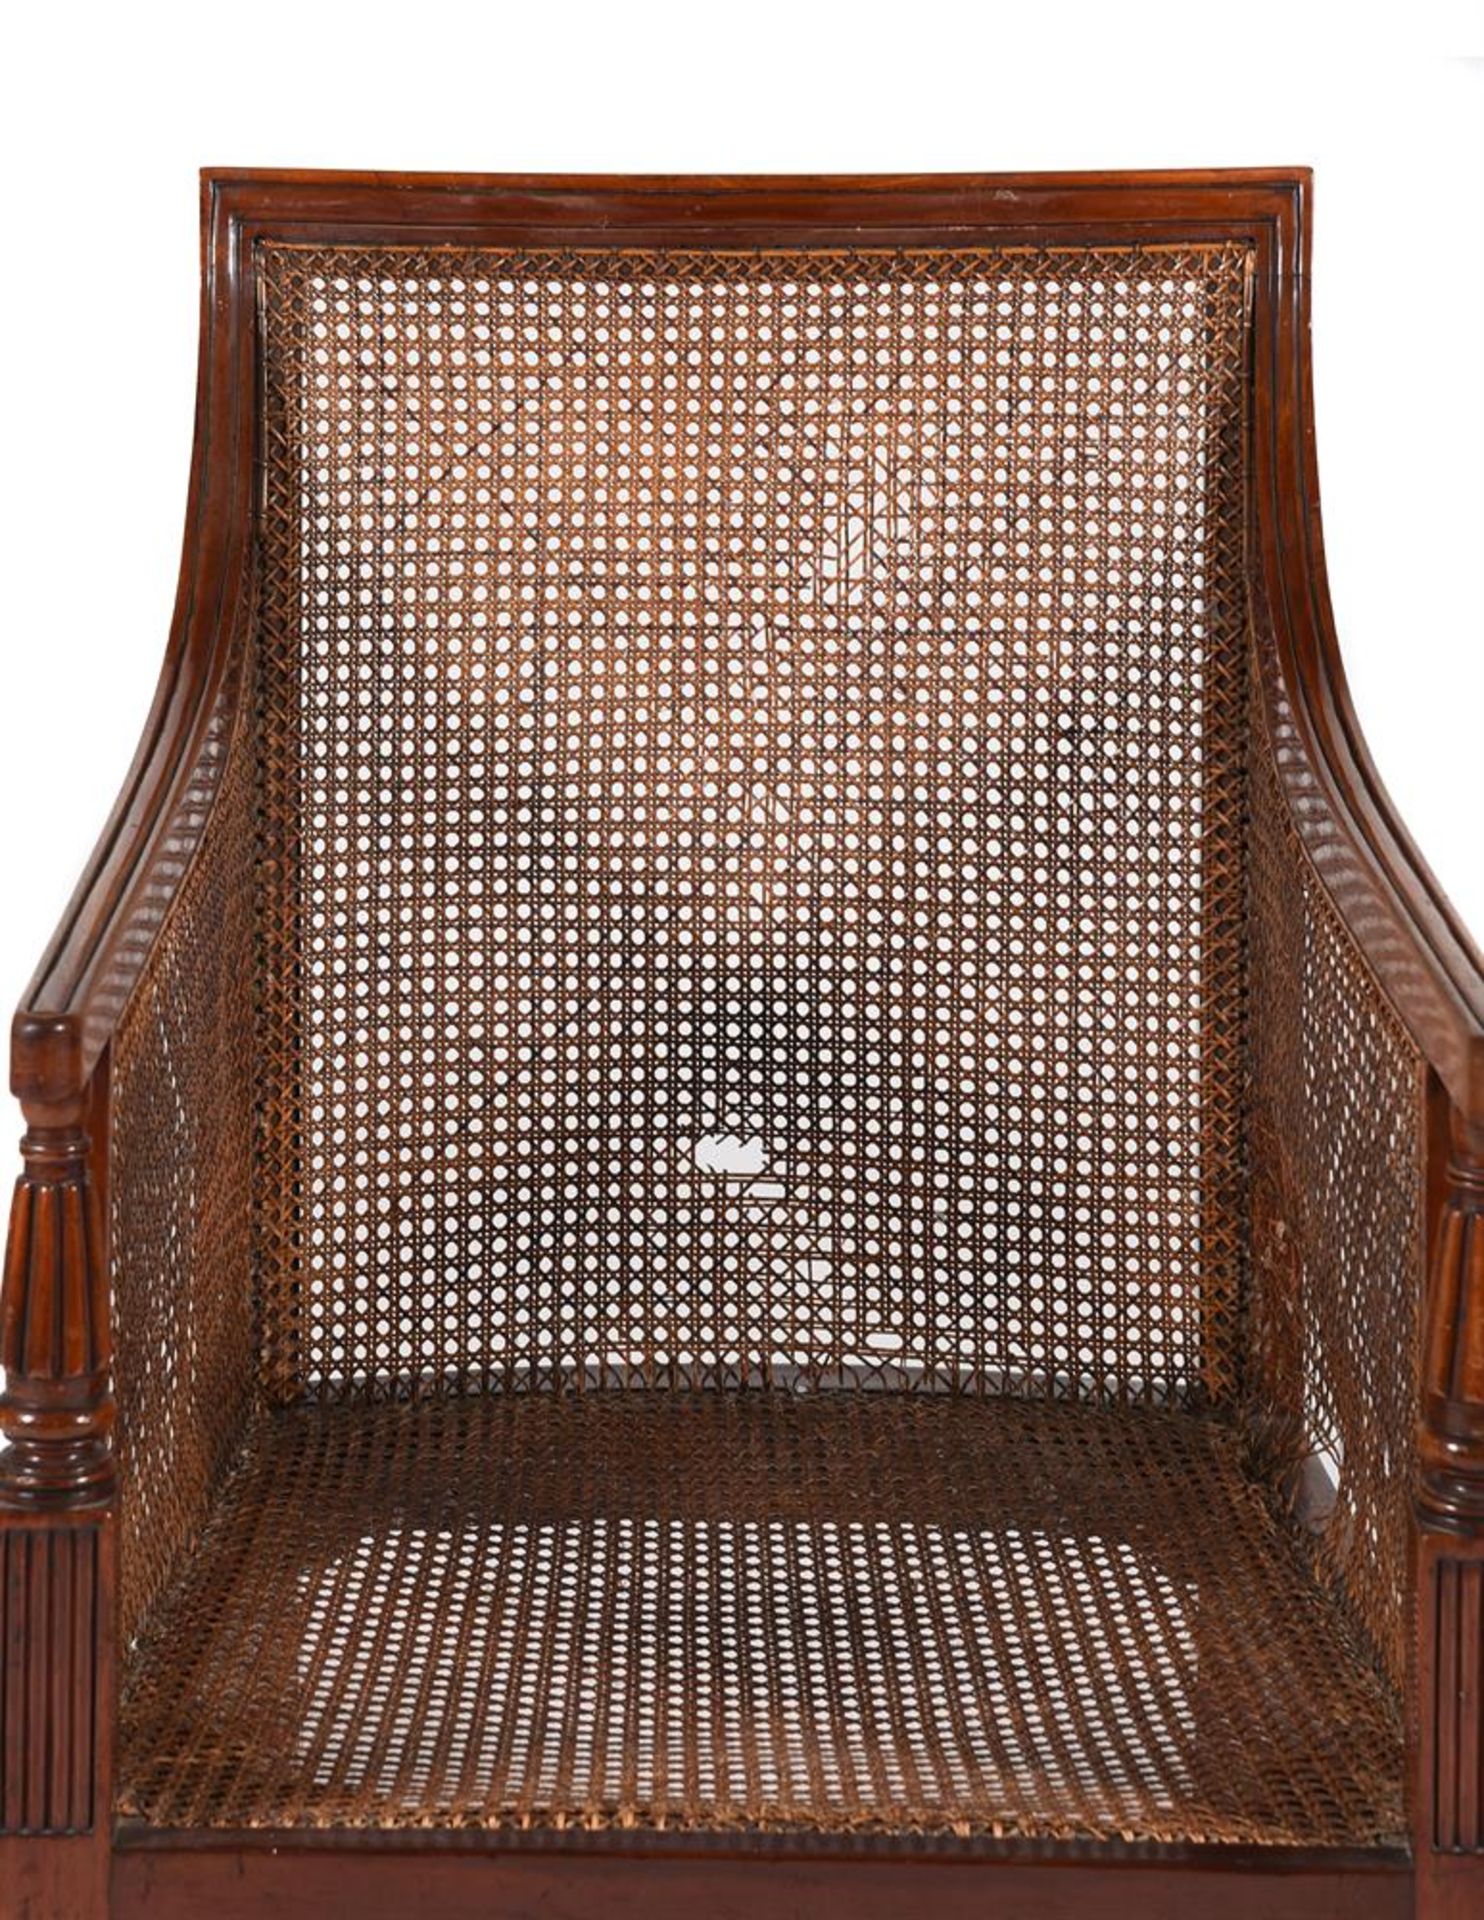 A GEORGE IV MAHOGANY LIBRARY ARMCHAIR IN THE MANNER OF GILLOWS - Image 7 of 7